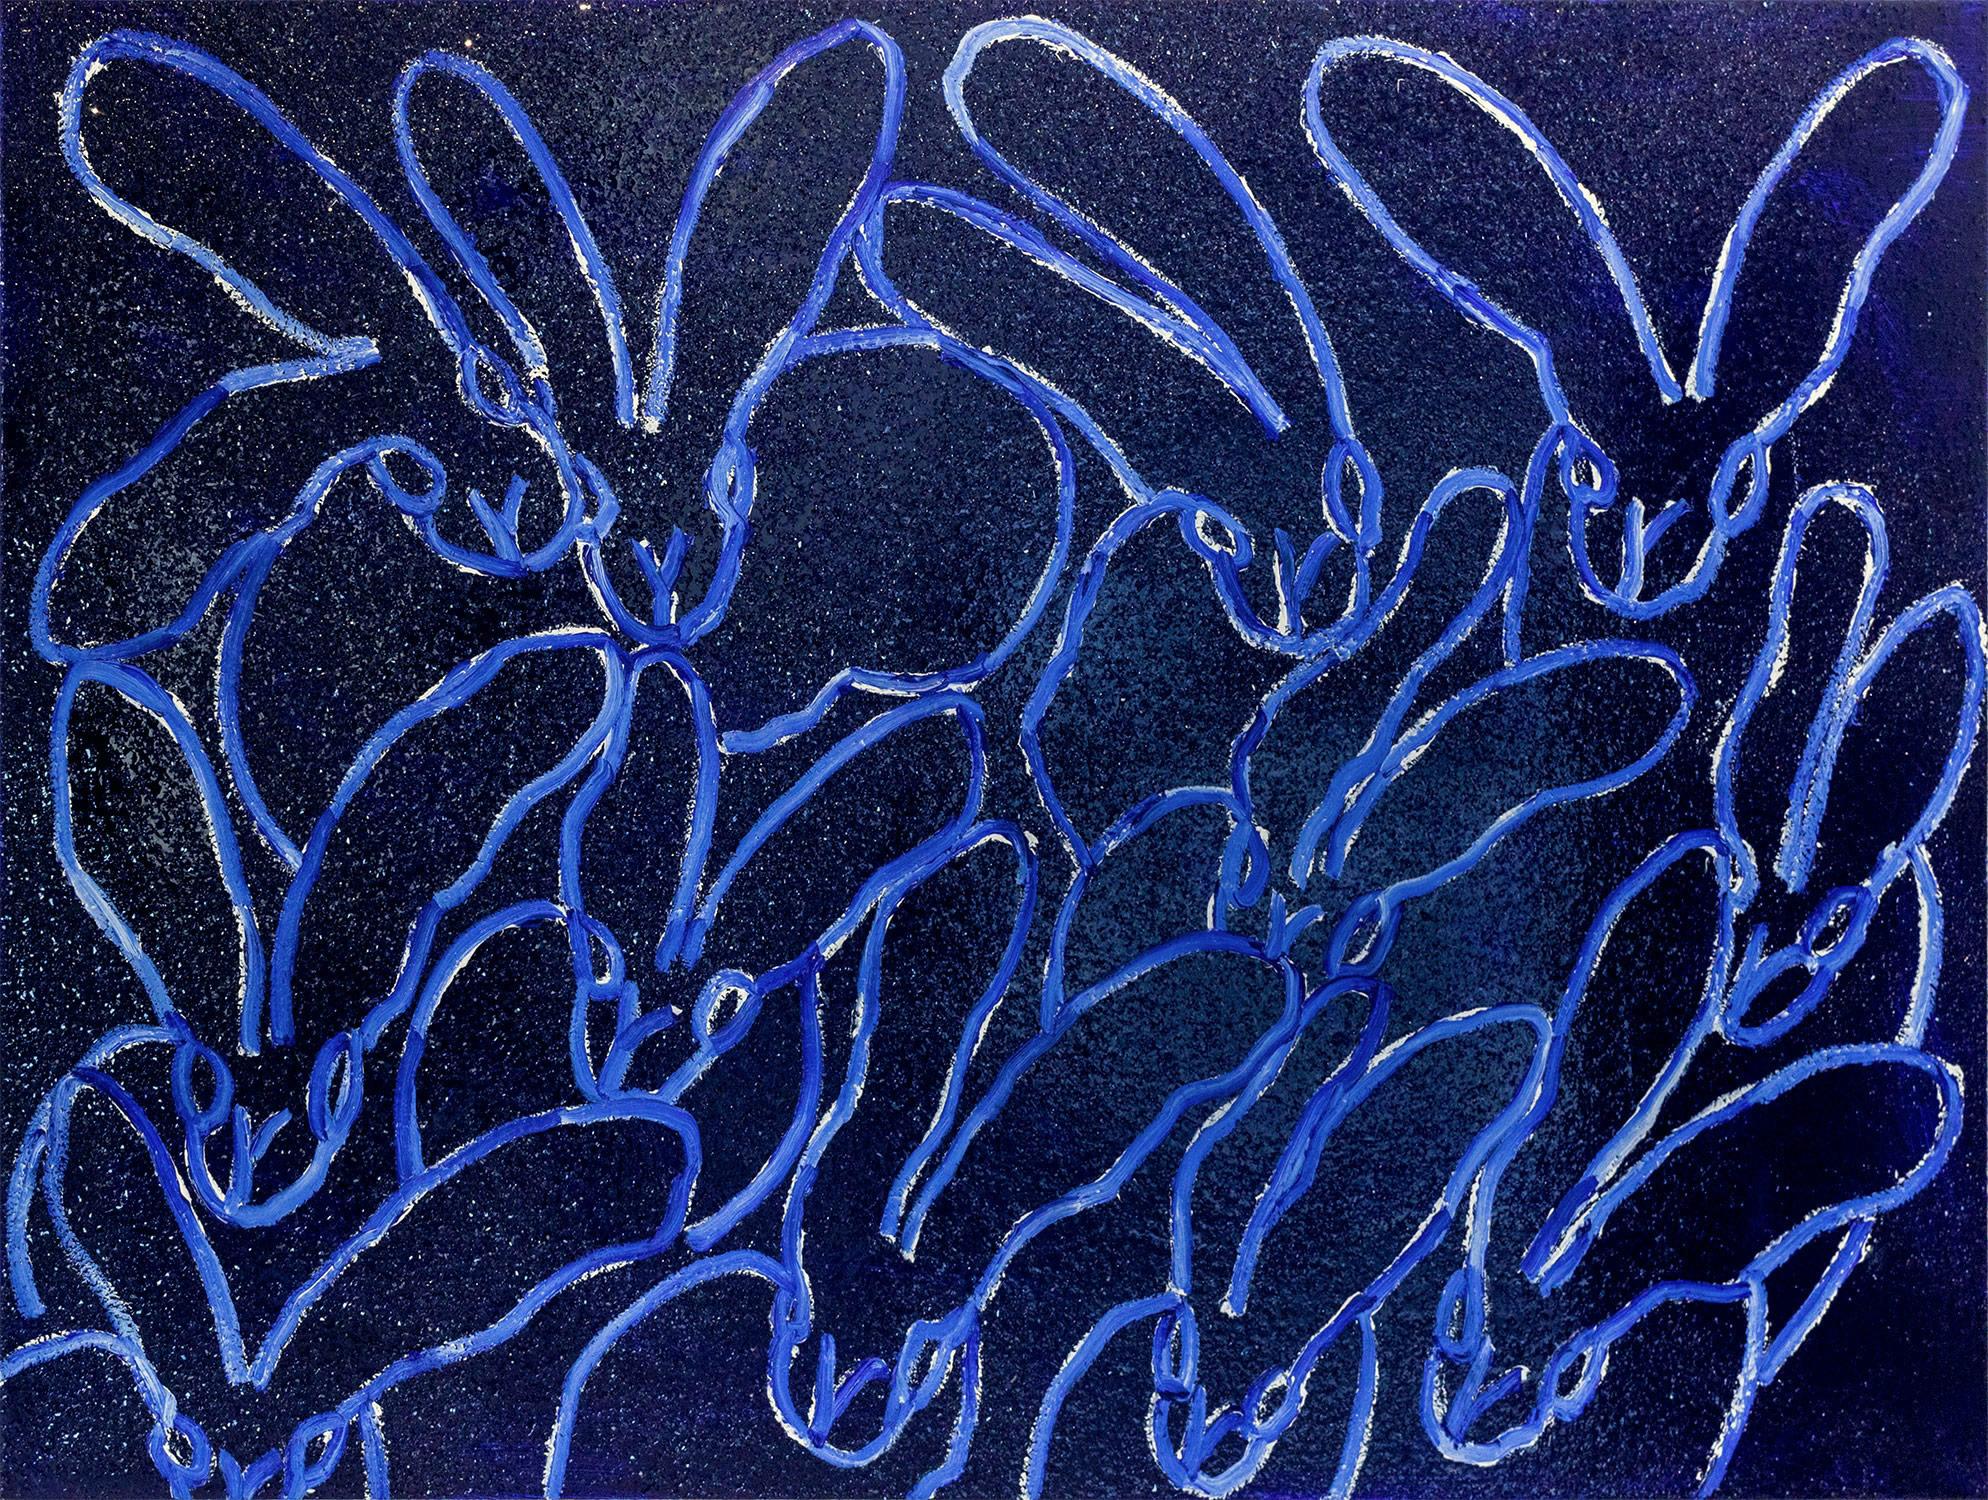 A wonderful composition of one of Slonem's most iconic subjects, Bunnies. This piece depicts gestural figures of white bunnies on an Ultramarine blue background with thick use of paint and diamond dust. Inspired by nature and a genuine love for